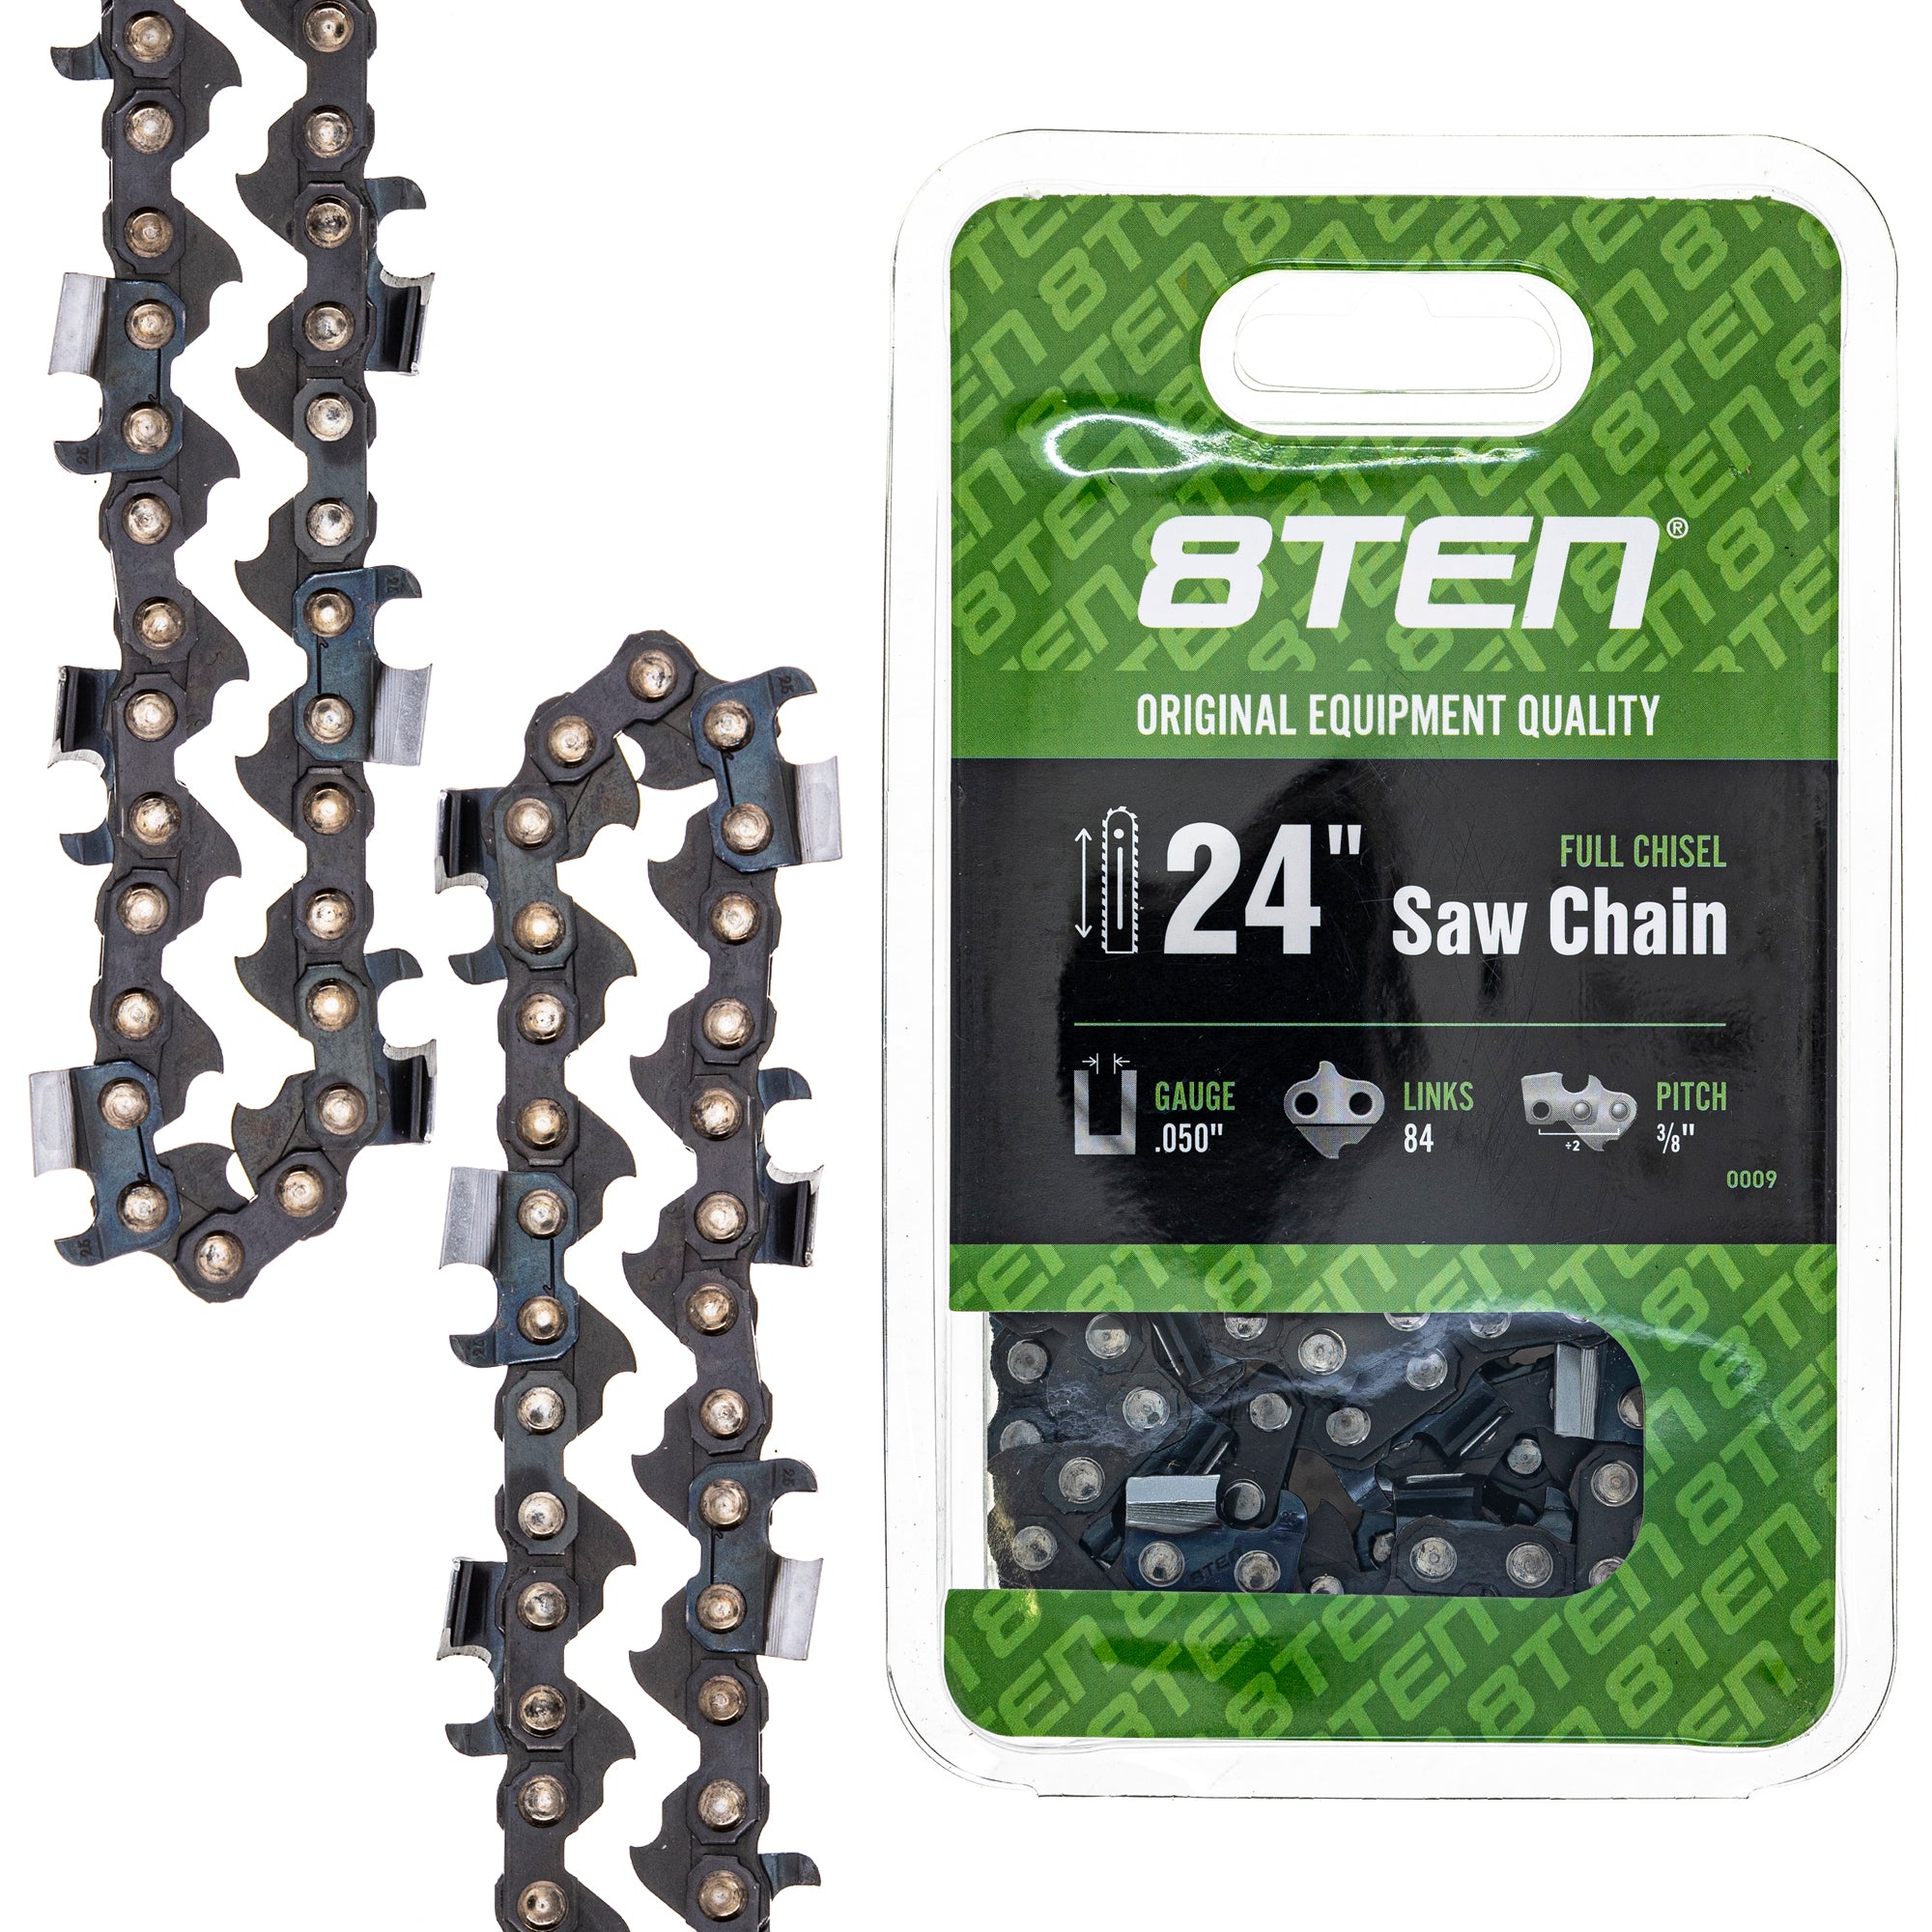 Chainsaw Chain 24 Inch .050 3/8 84DL for zOTHER Windsor Stens Oregon GB Carlton MSE MS 34 8TEN 810-CCC2221H